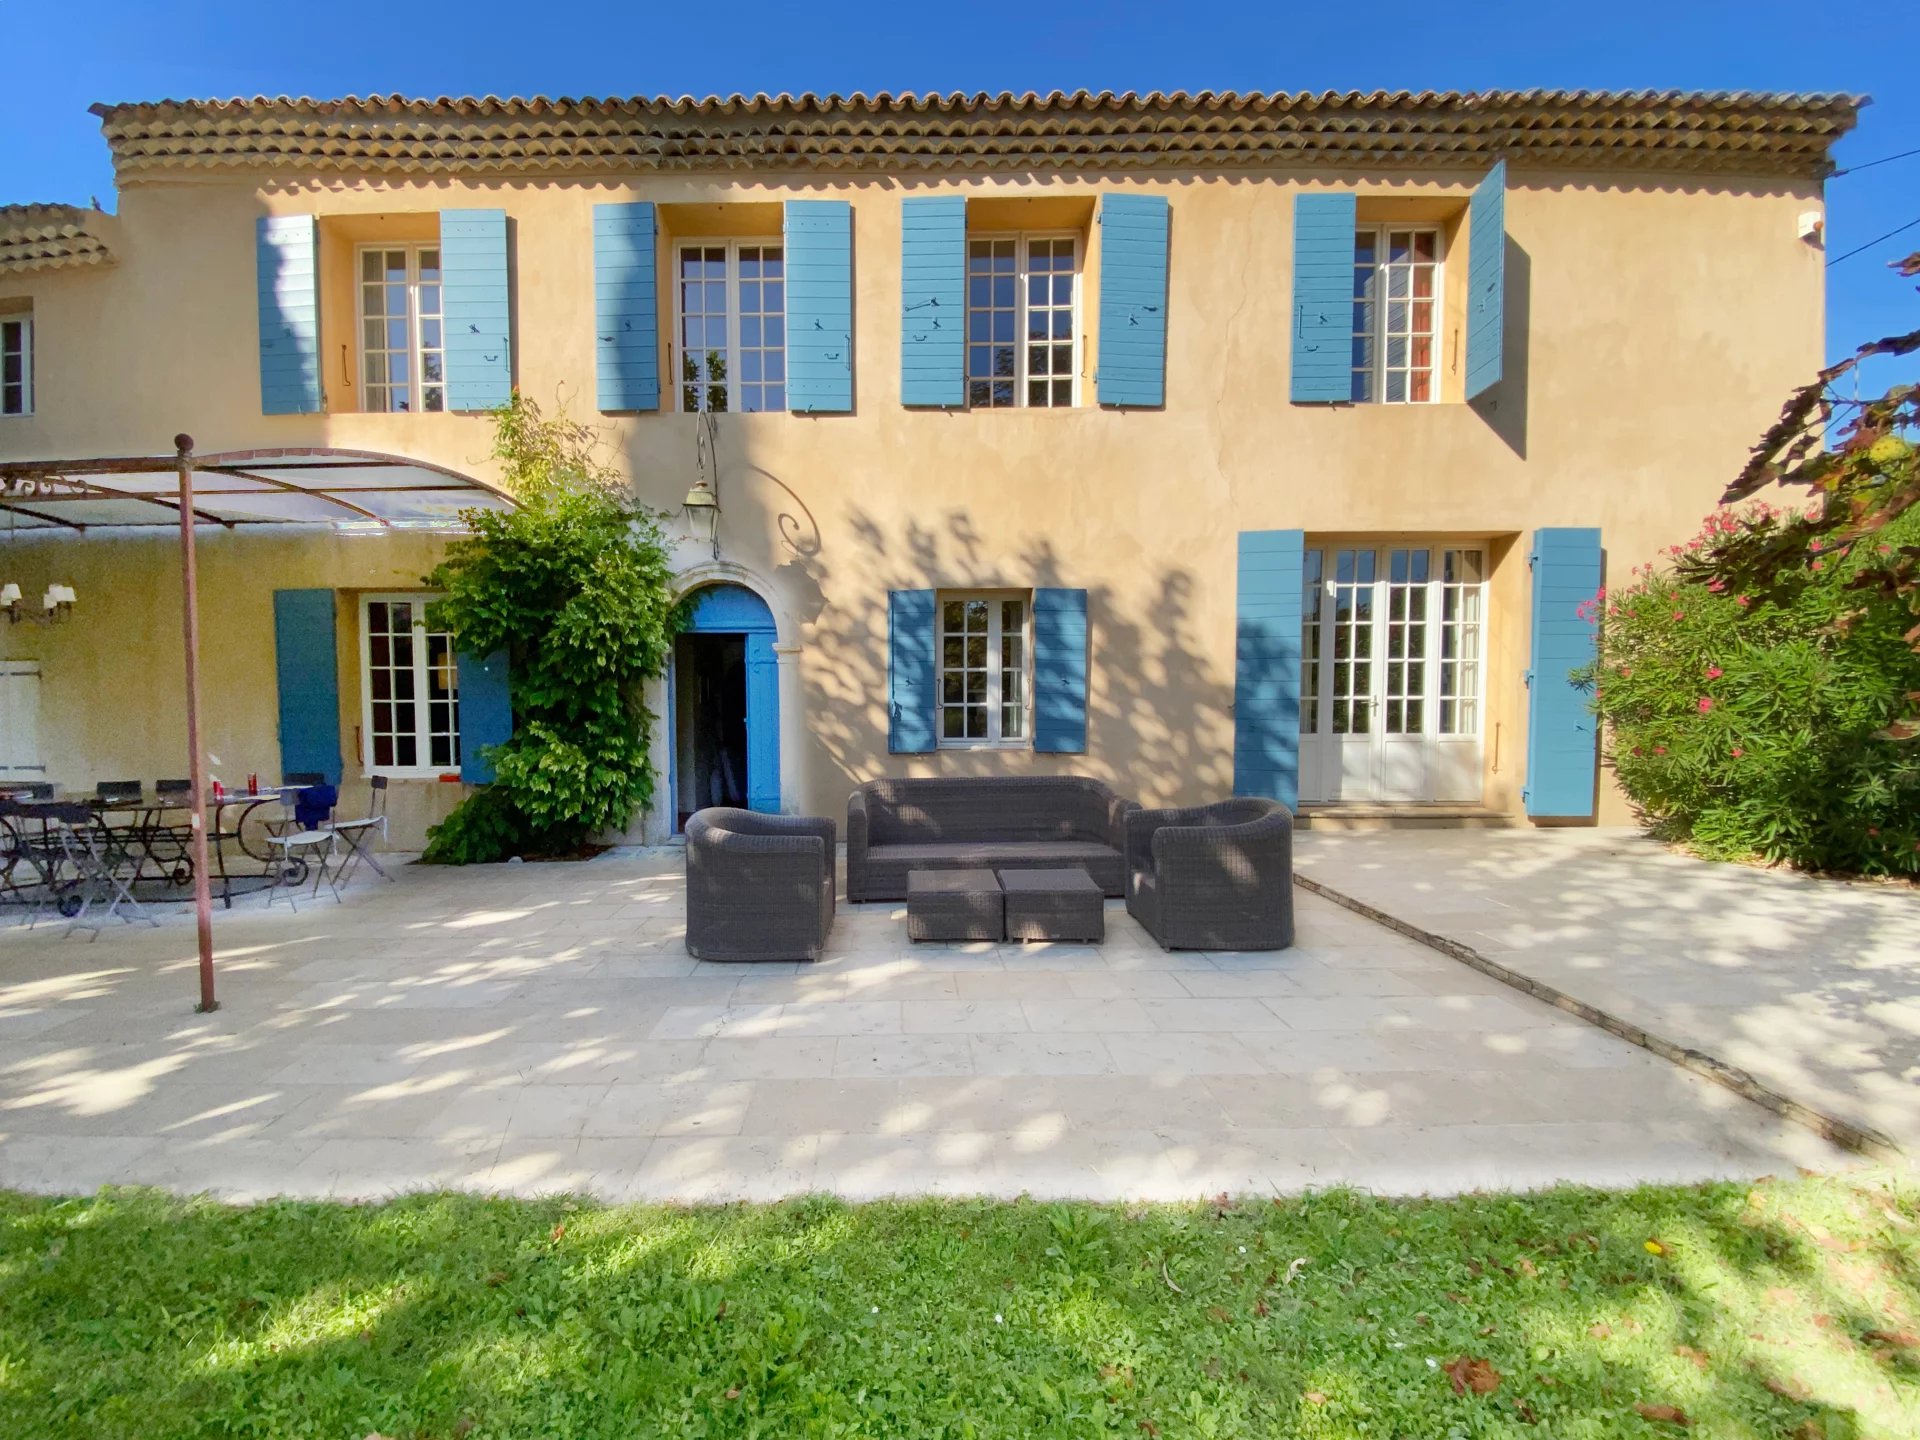 19th century Country House for sale in Aix en Provence